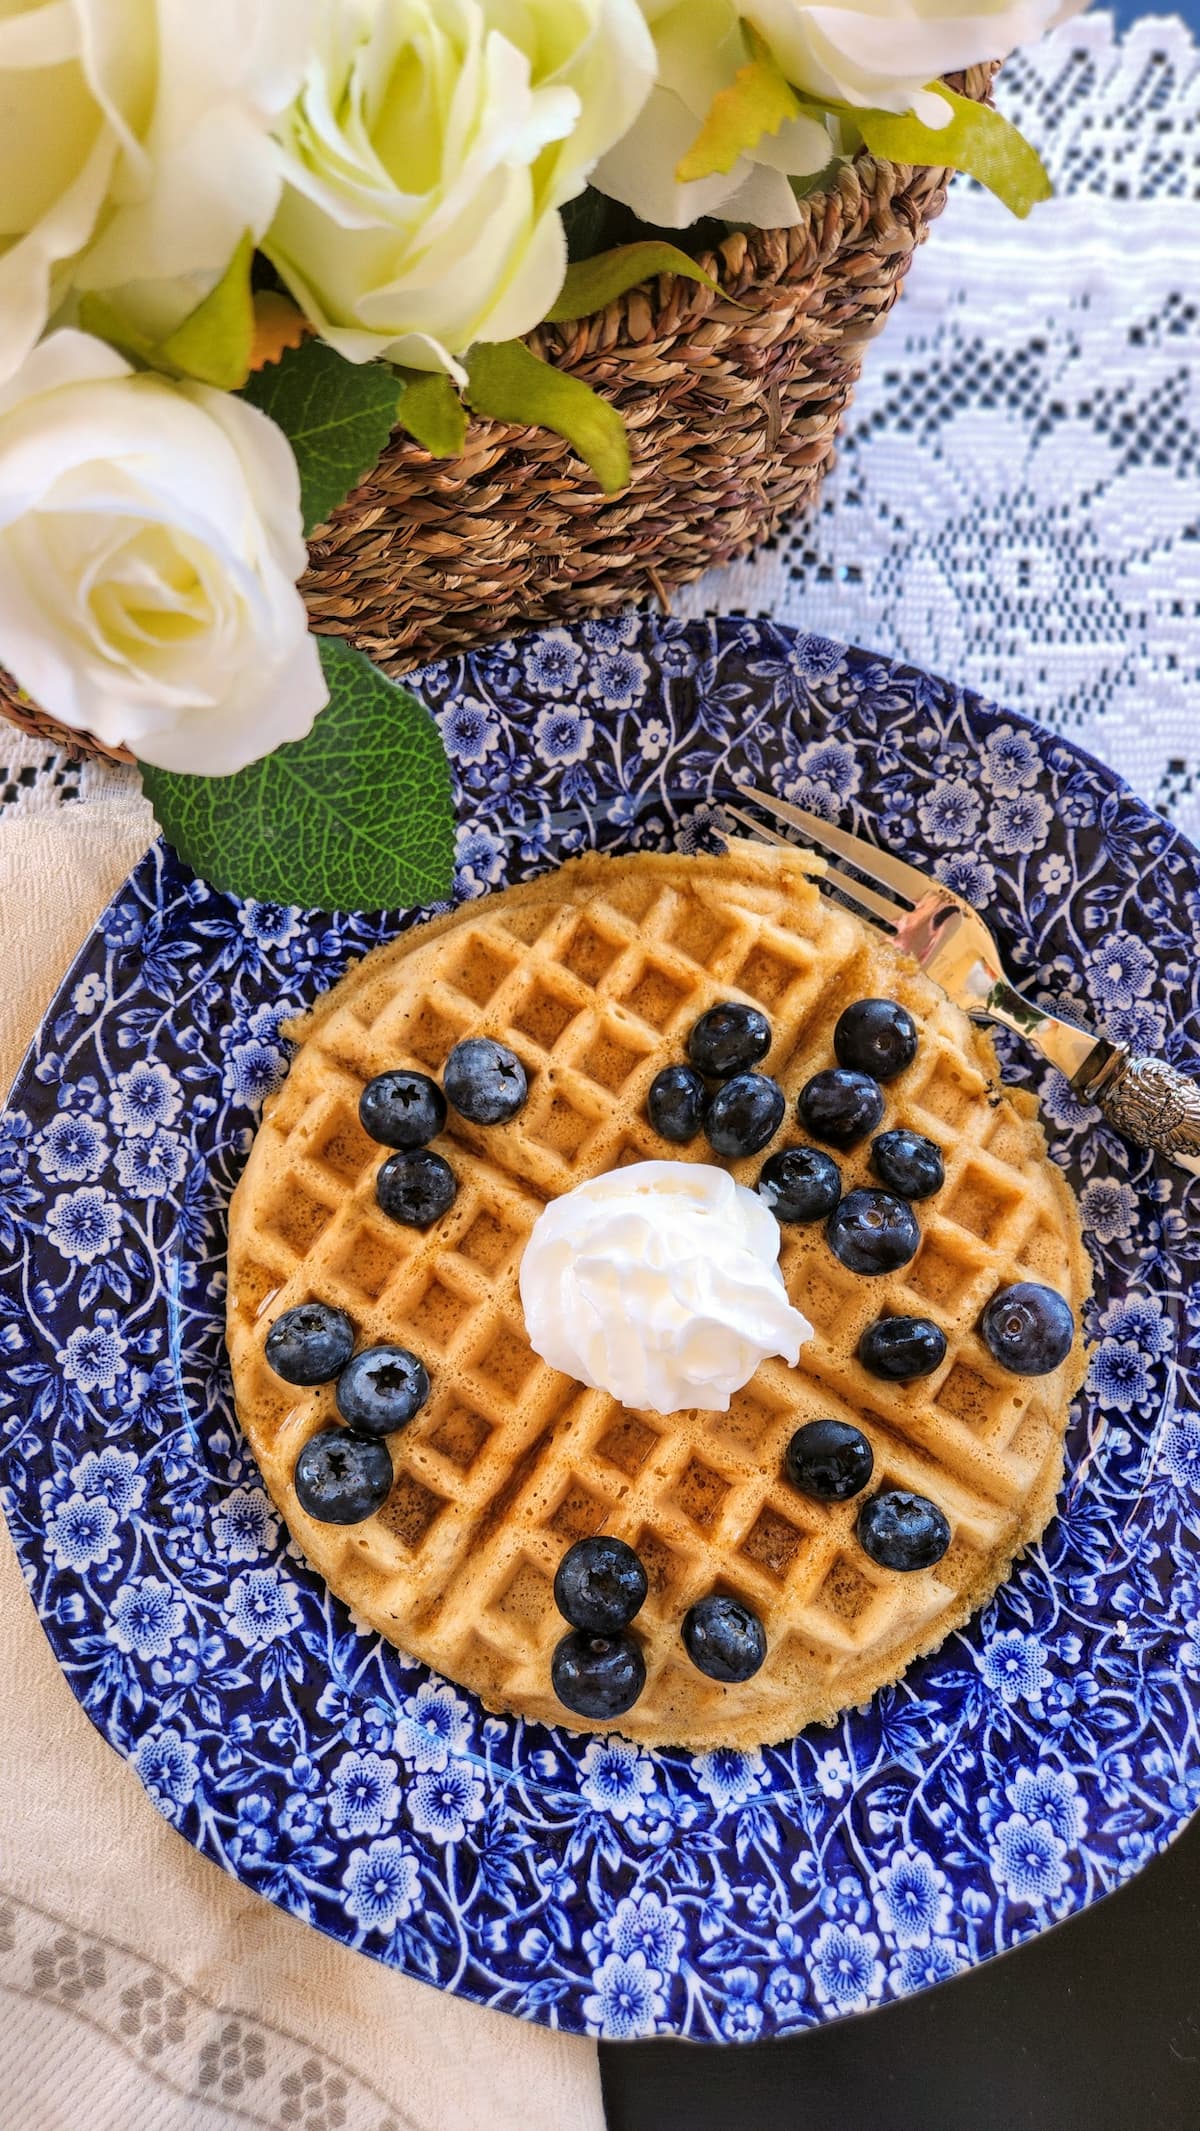 Easy Waffle Recipe Without Milk: Dairy-free Gluten Free